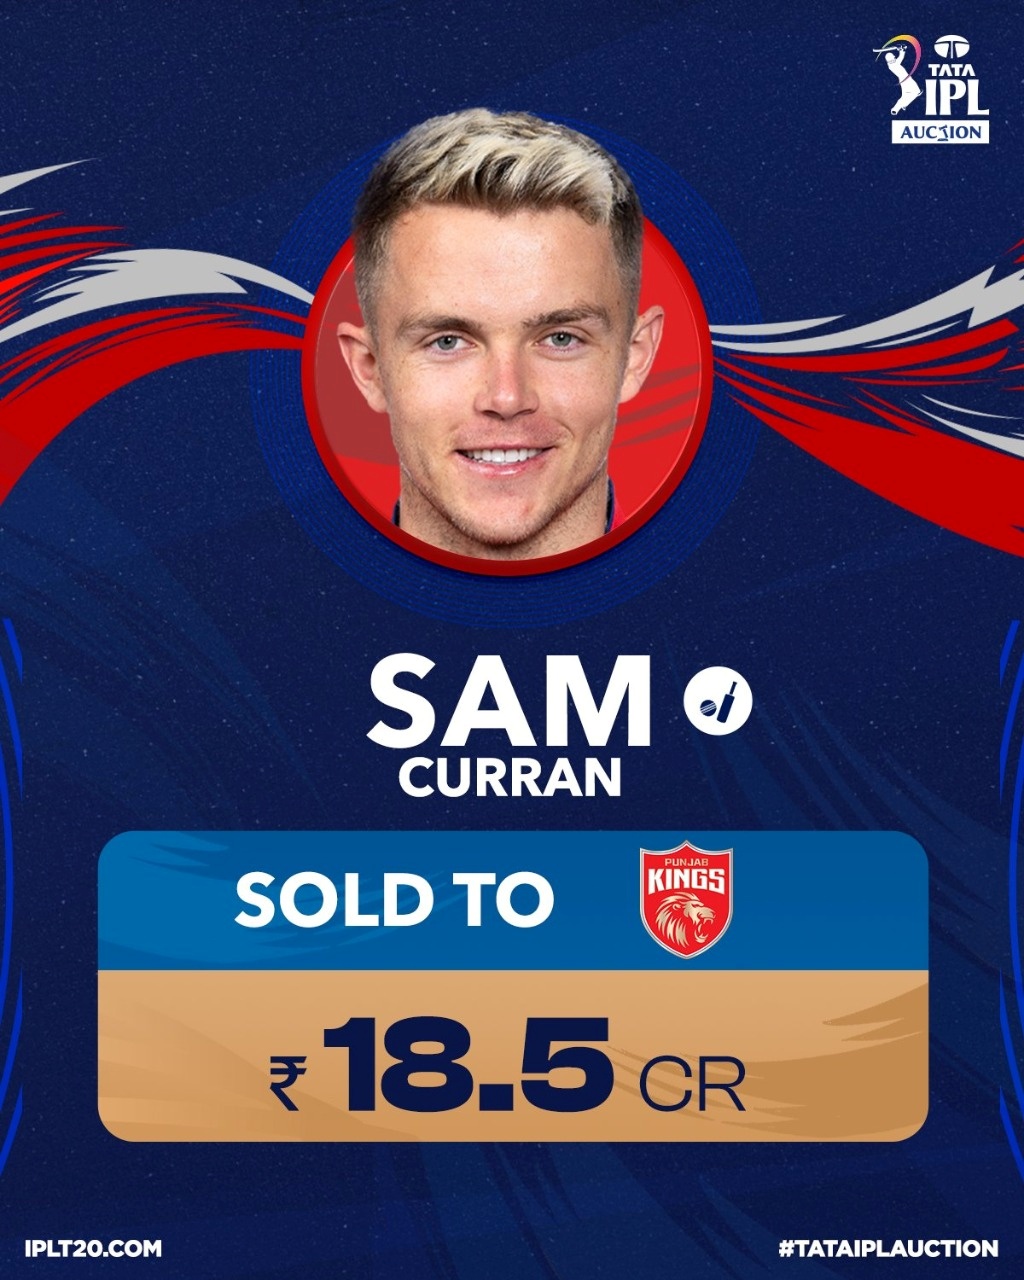 Sam Curran bought by Punjab Kings for Rs 18.50 crore